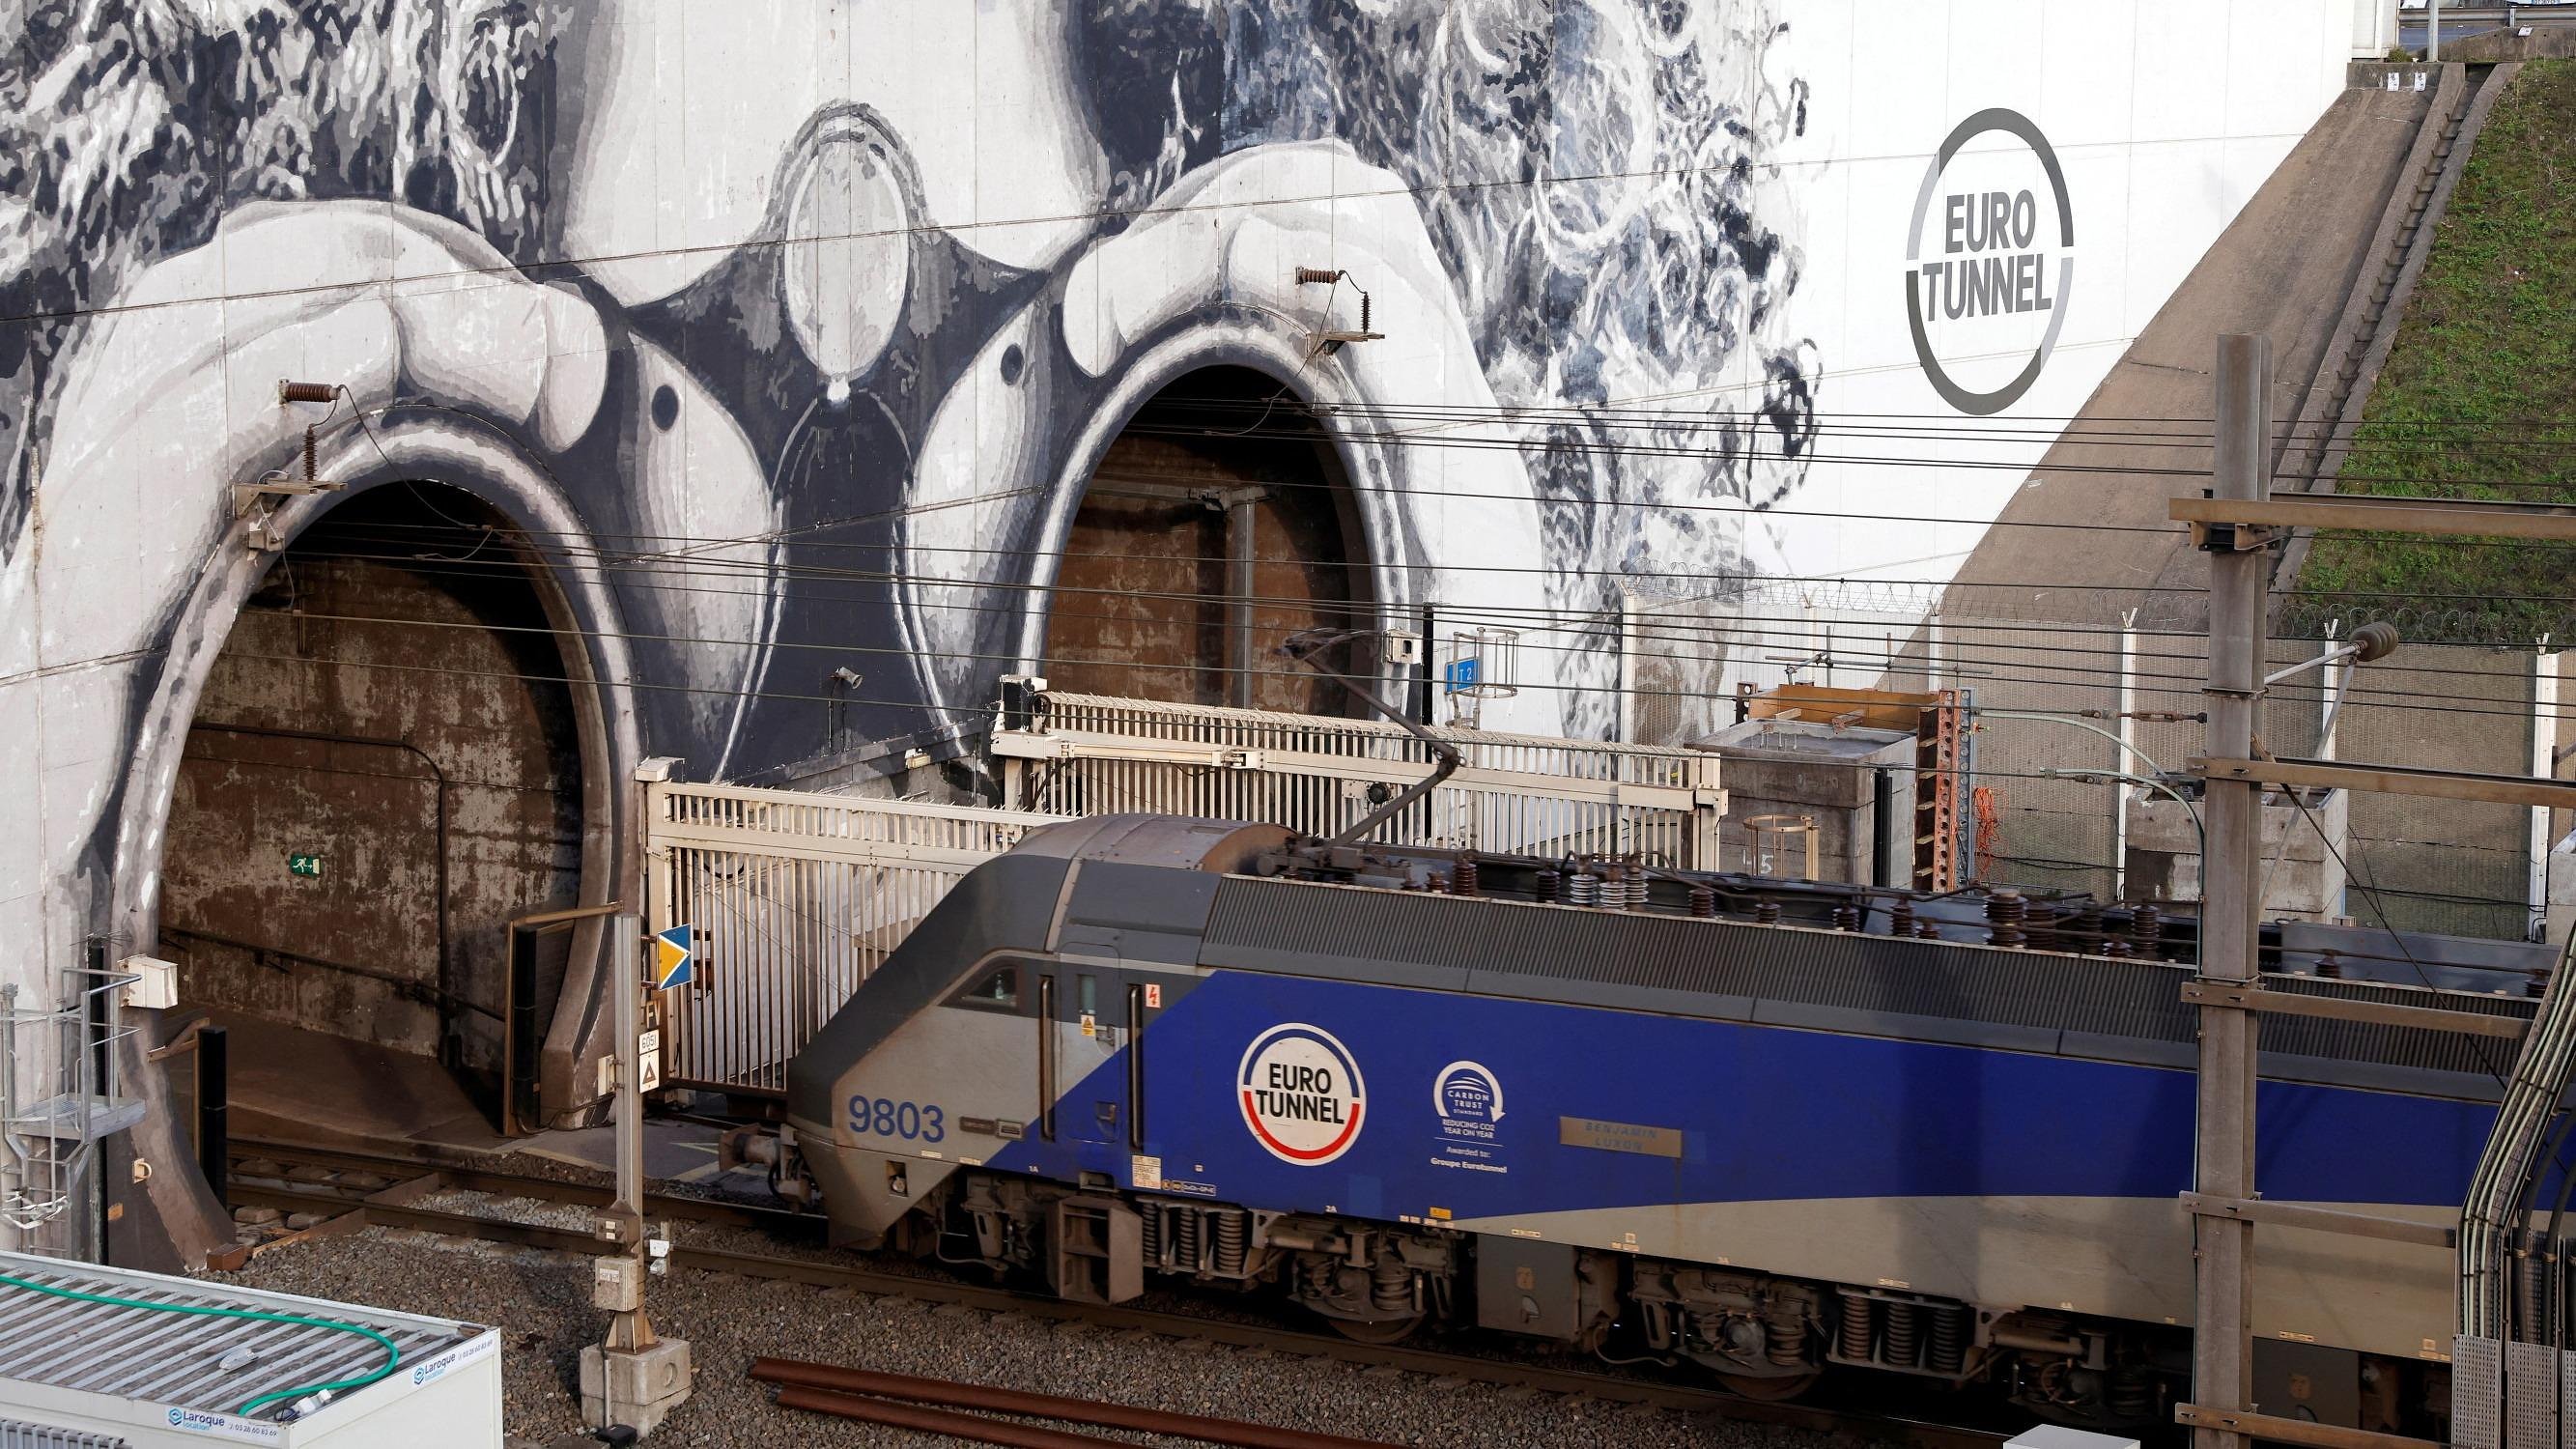 The Channel Tunnel wants to attract companies to serve new destinations in Europe